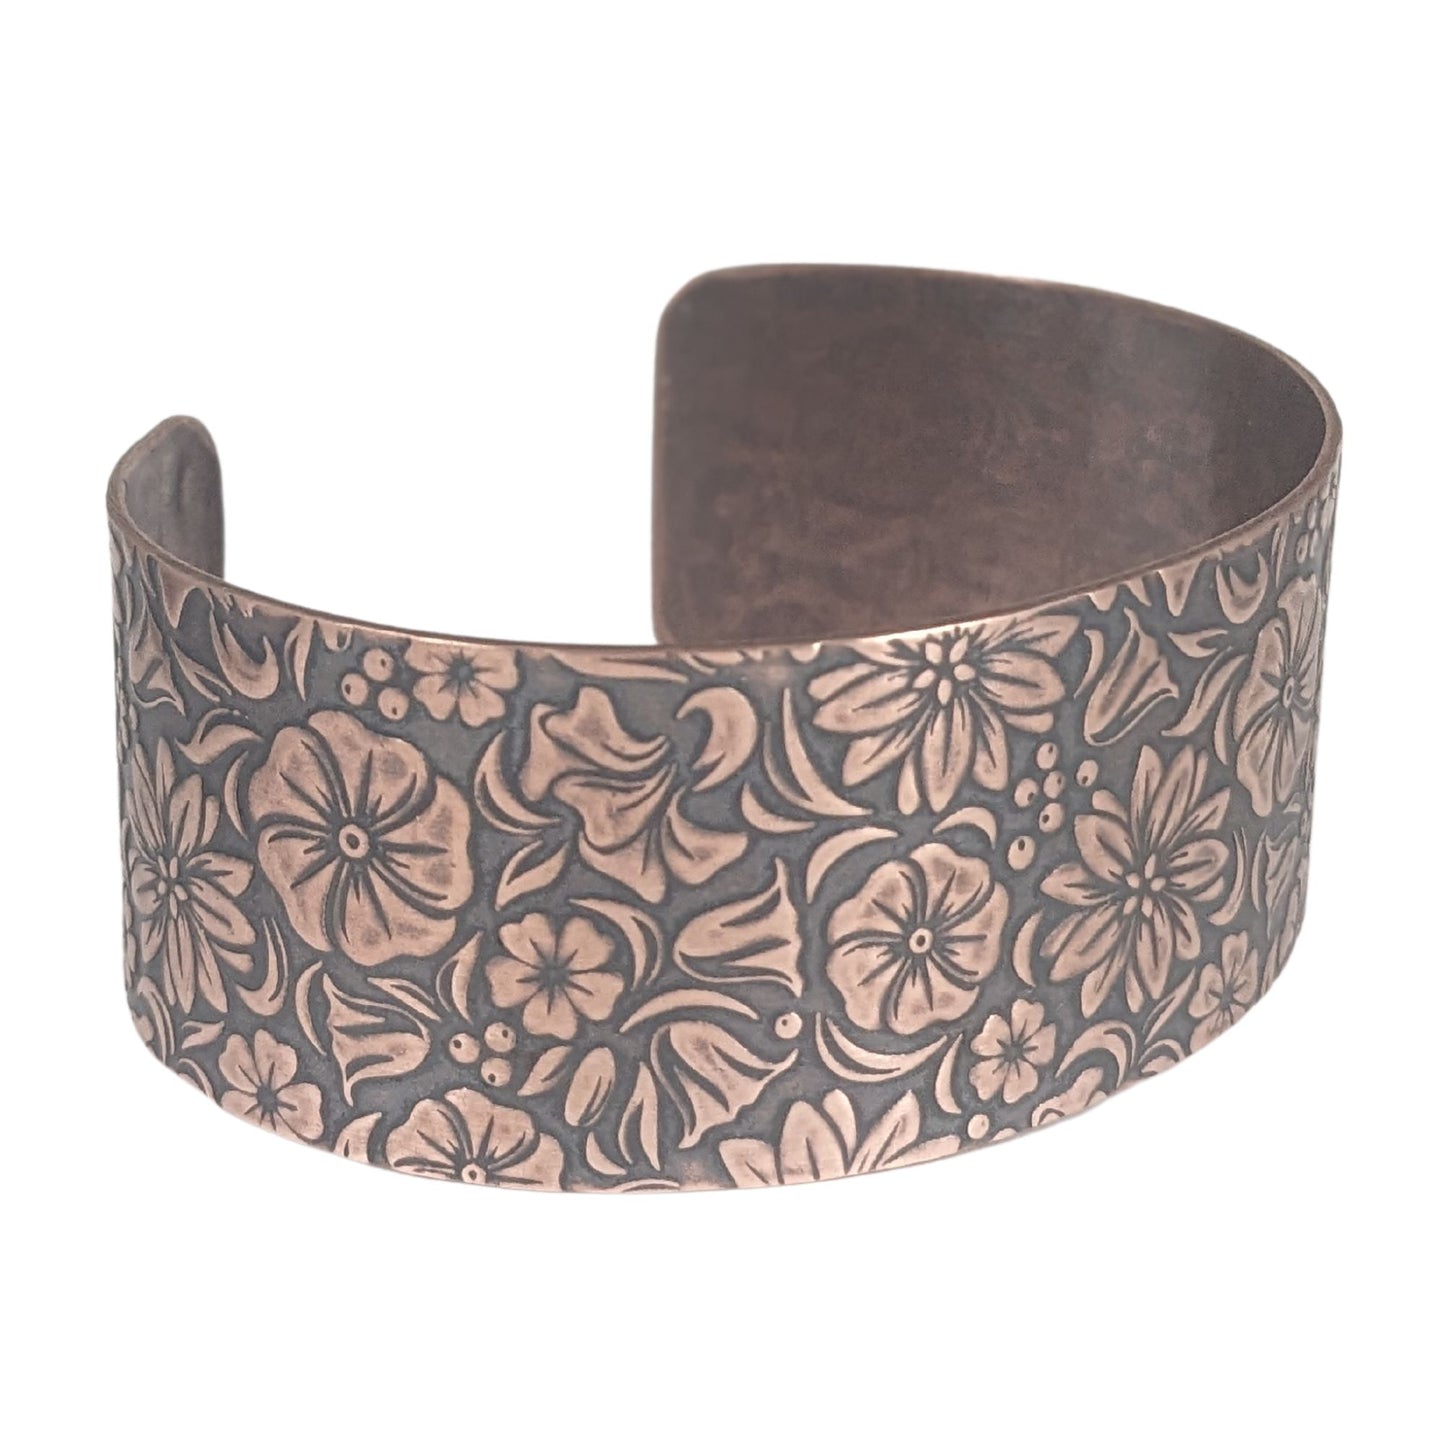 One inch wide copper cuff bracelet covered in designs of common garden flowers, looked at from above. The background around the flowers is darkened to accentuate the detail.